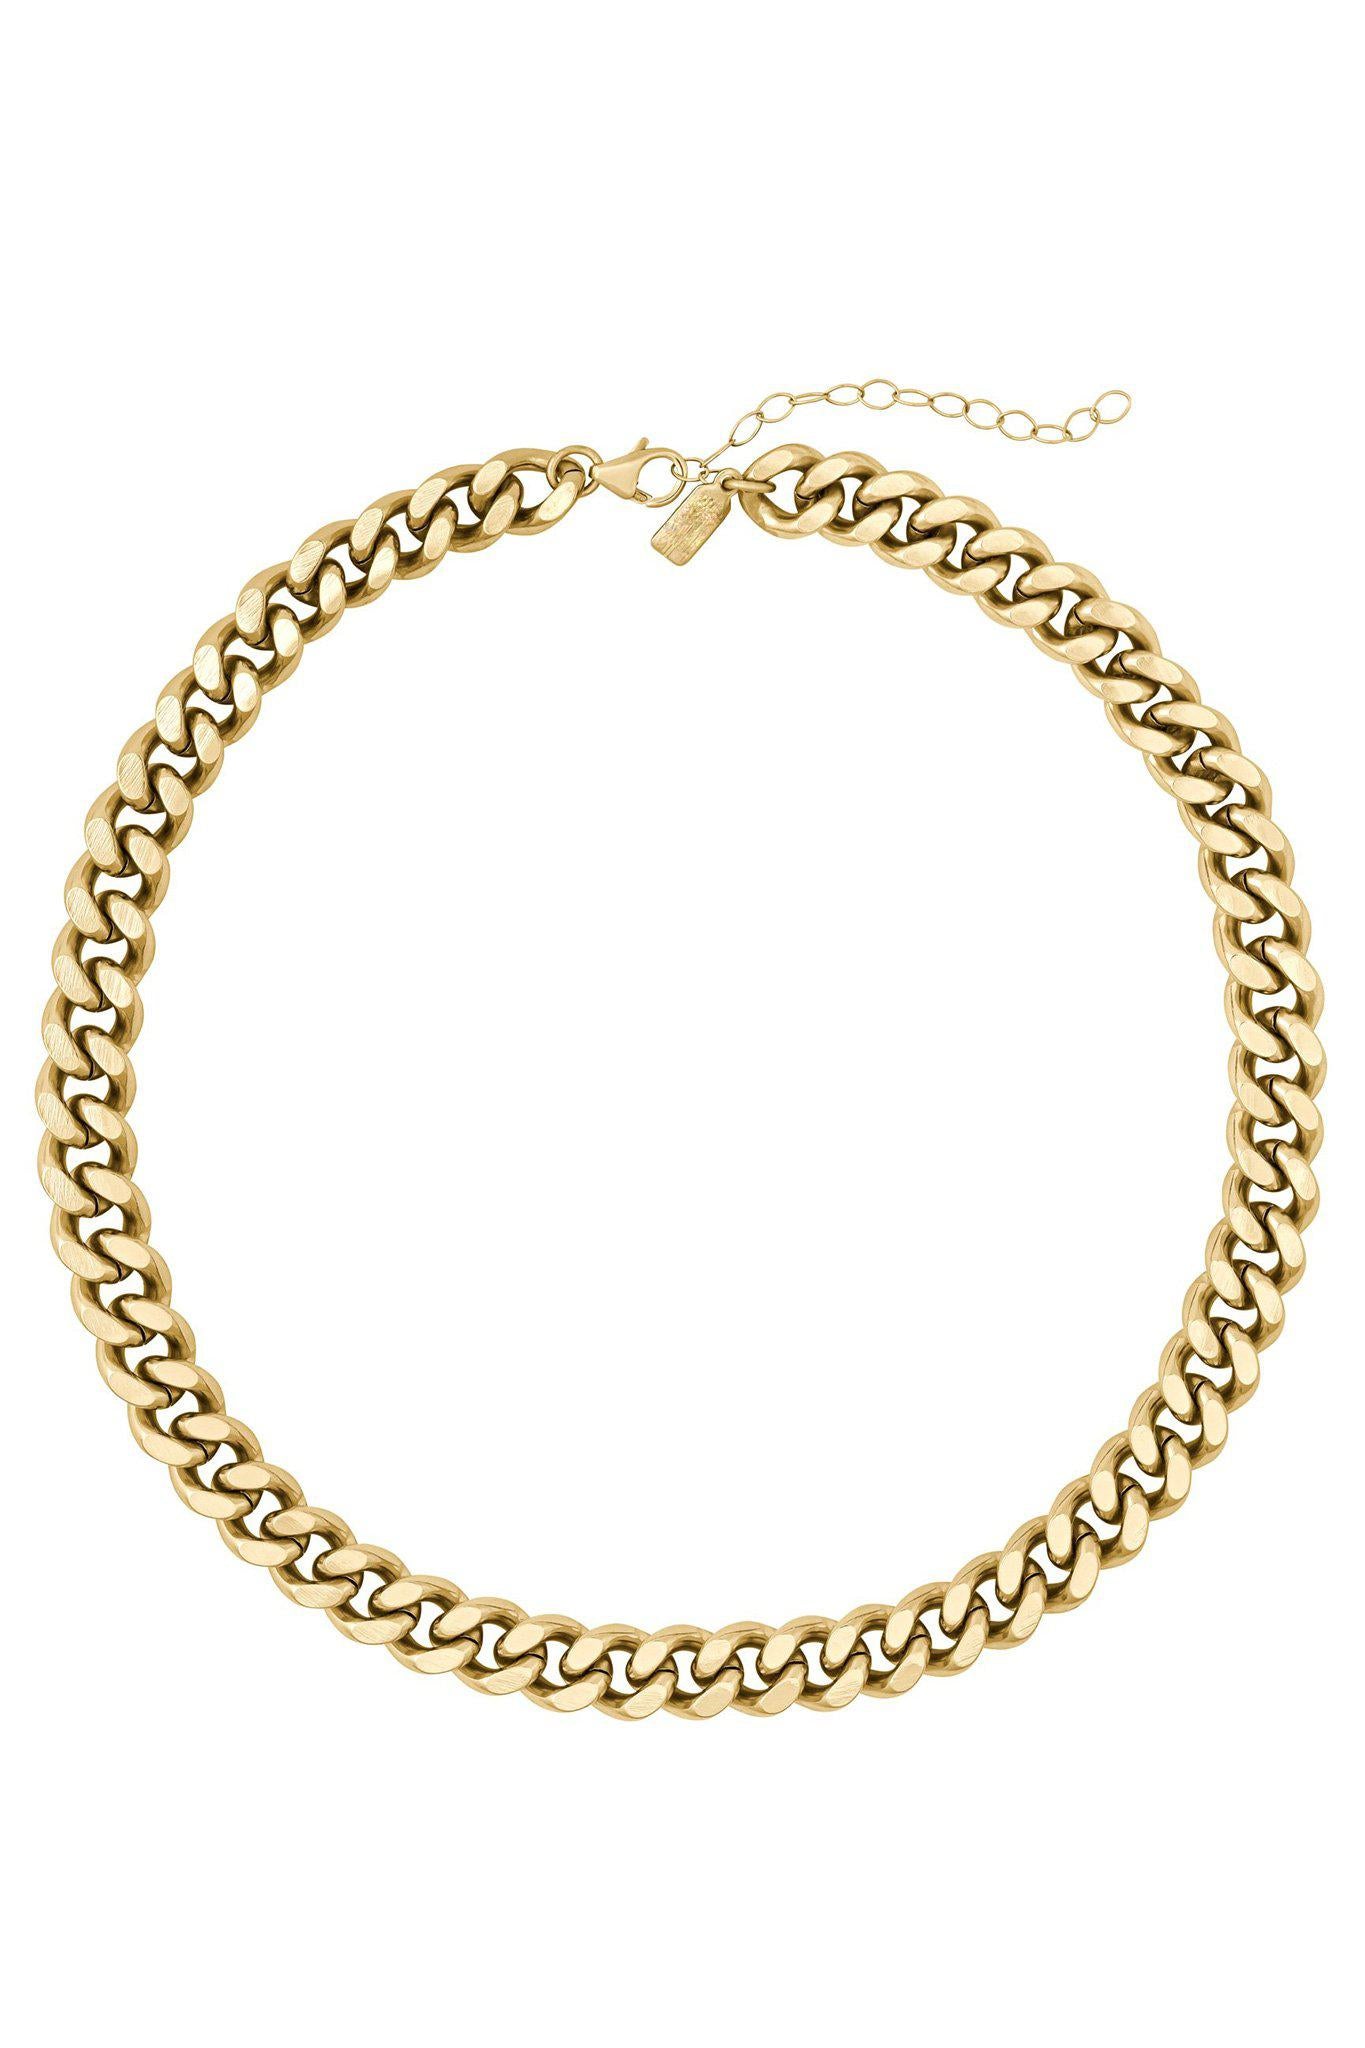 Giselle Thick Gold Chain Necklace on white background